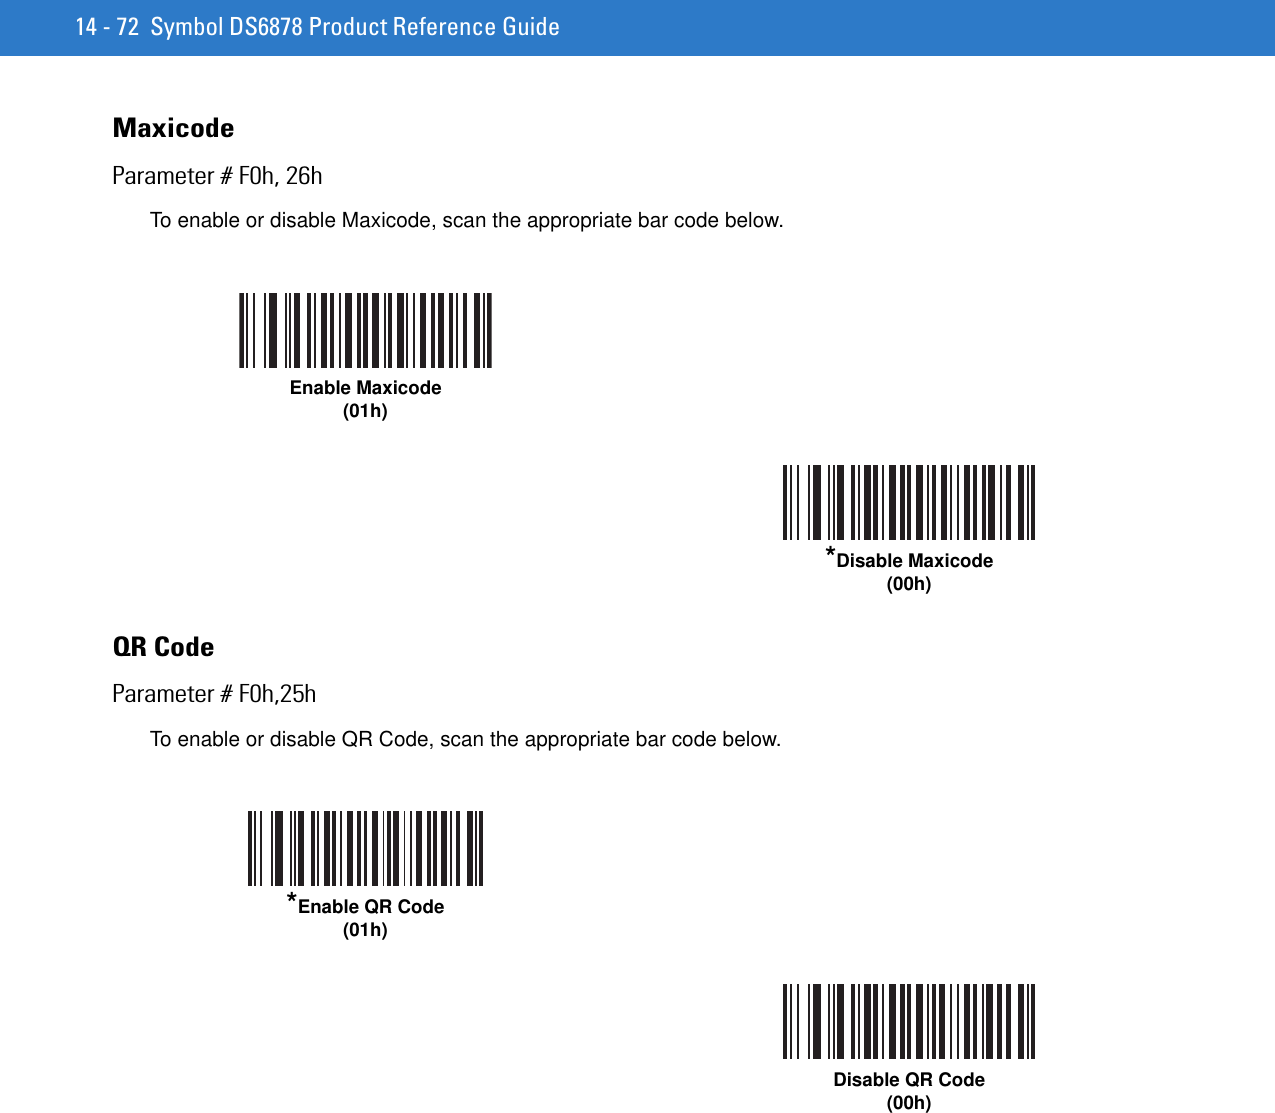 14 - 72 Symbol DS6878 Product Reference GuideMaxicodeParameter # F0h, 26hTo enable or disable Maxicode, scan the appropriate bar code below.QR CodeParameter # F0h,25hTo enable or disable QR Code, scan the appropriate bar code below.Enable Maxicode(01h)*Disable Maxicode(00h)*Enable QR Code(01h)Disable QR Code(00h)